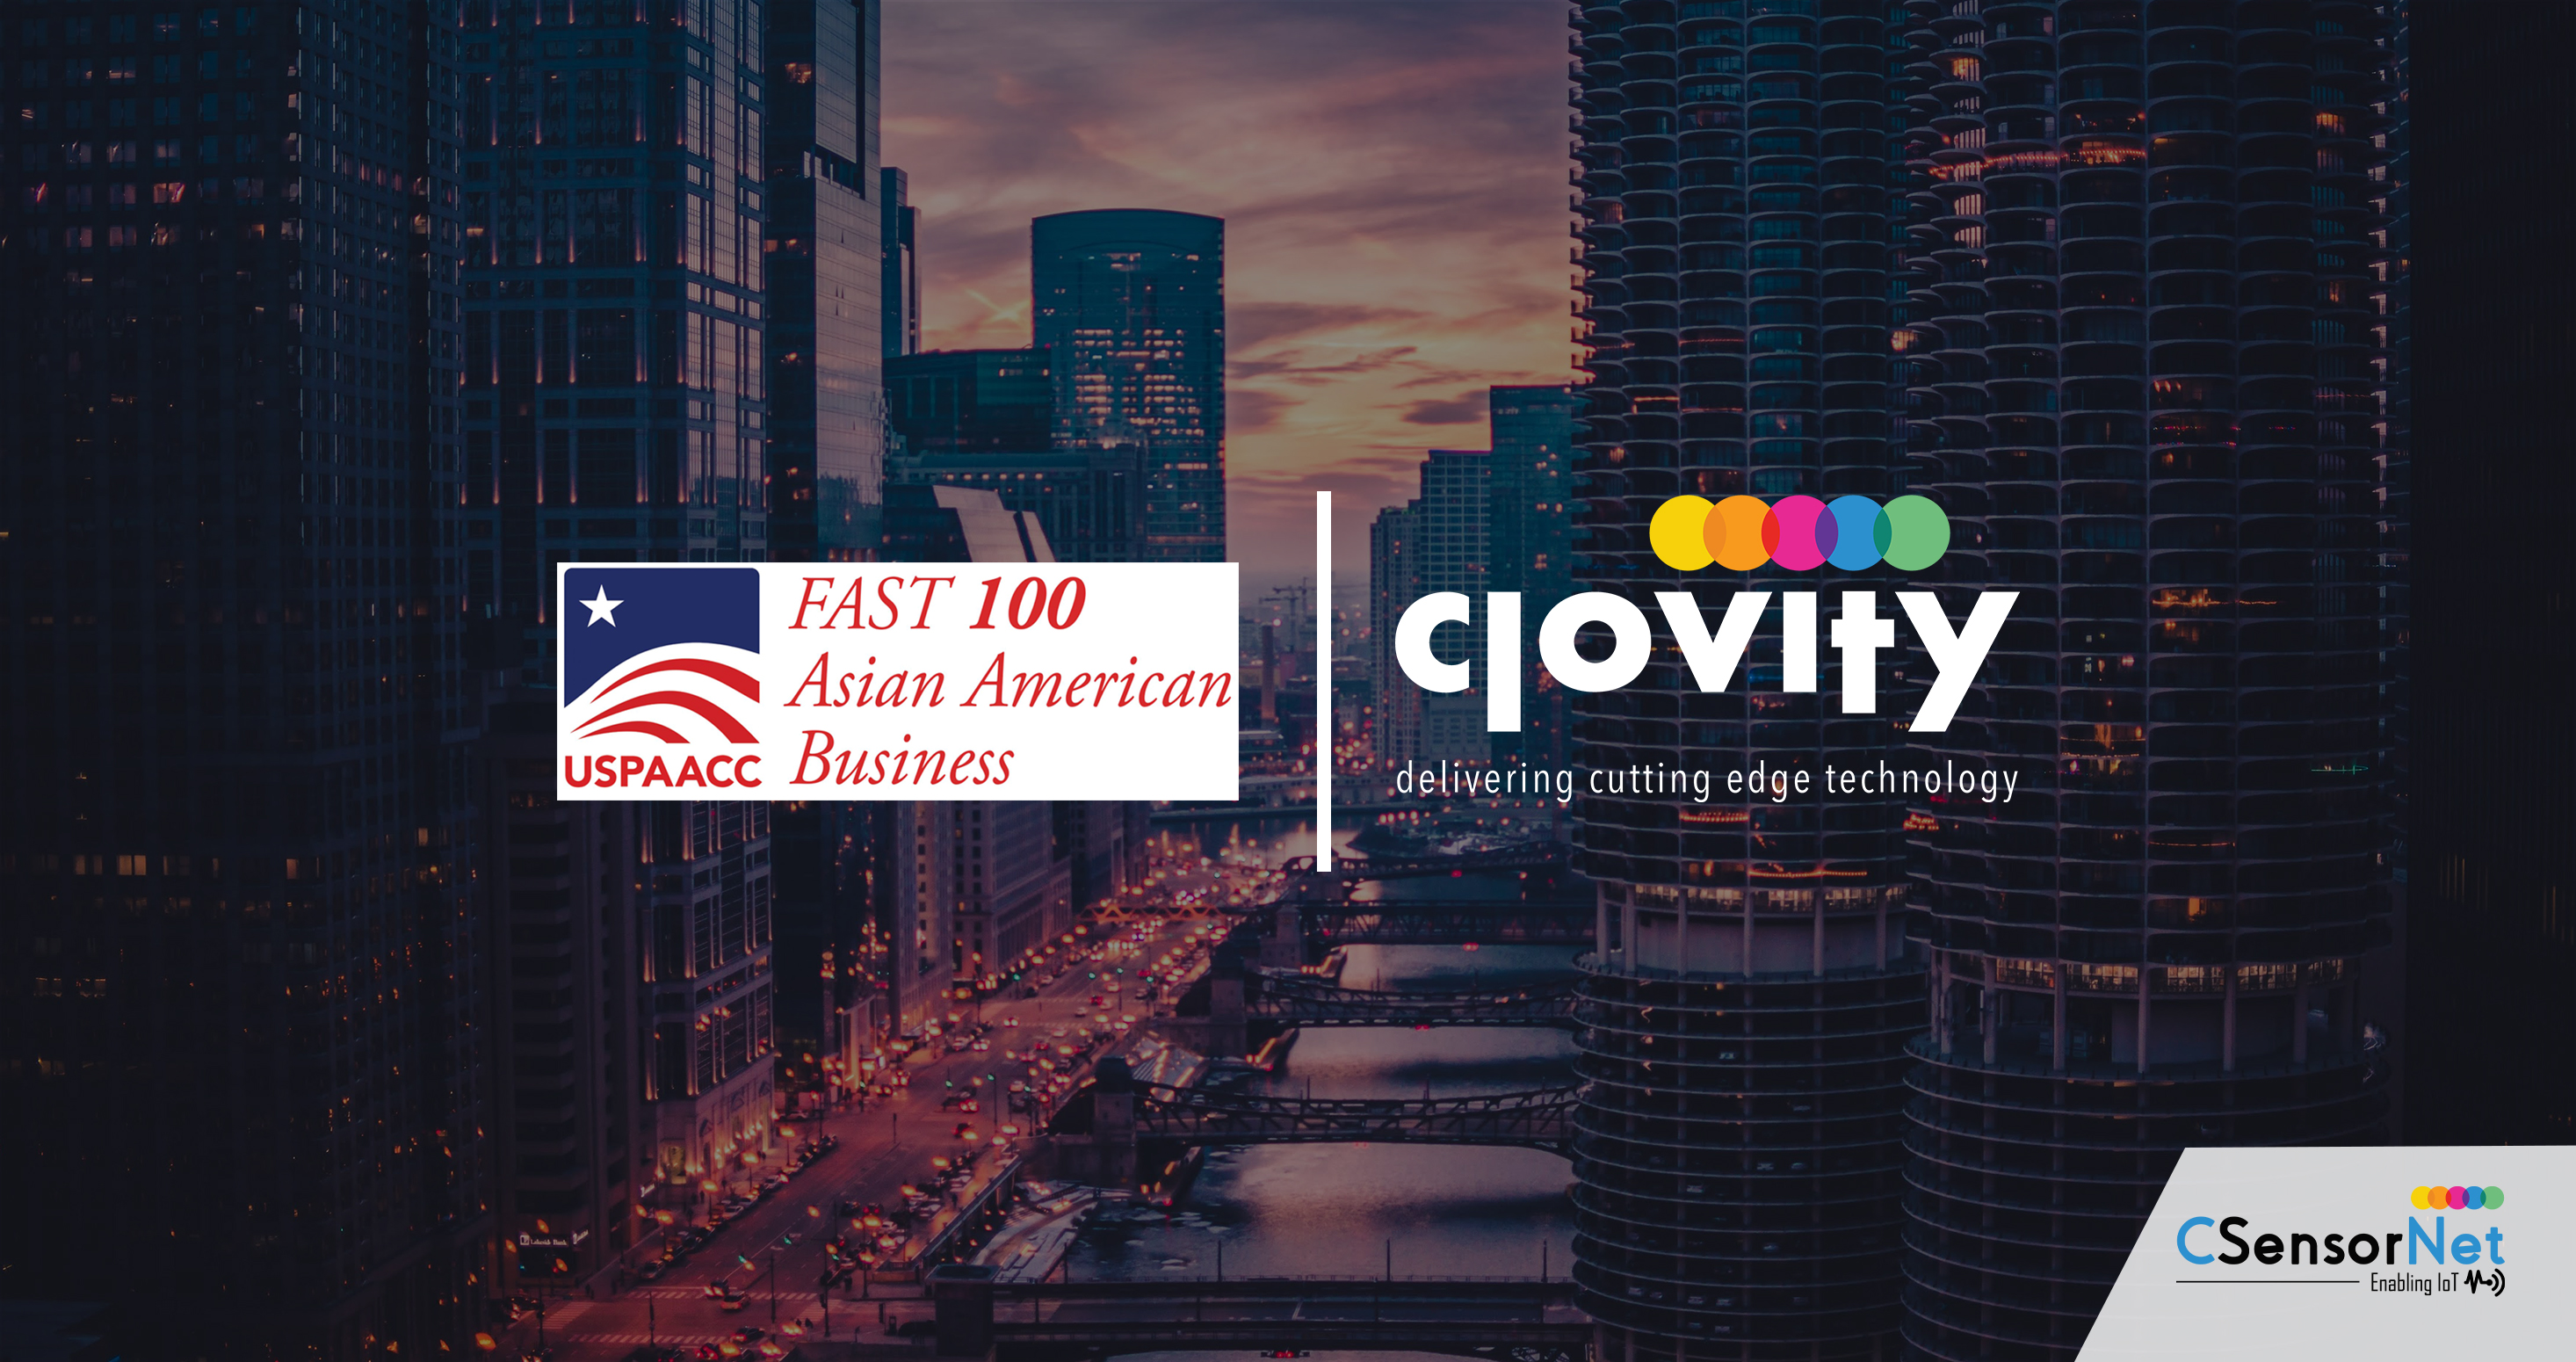 Clovity secures the esteemed "USPAACC's FAST 100 Asian American Business Award" once again for 2023!